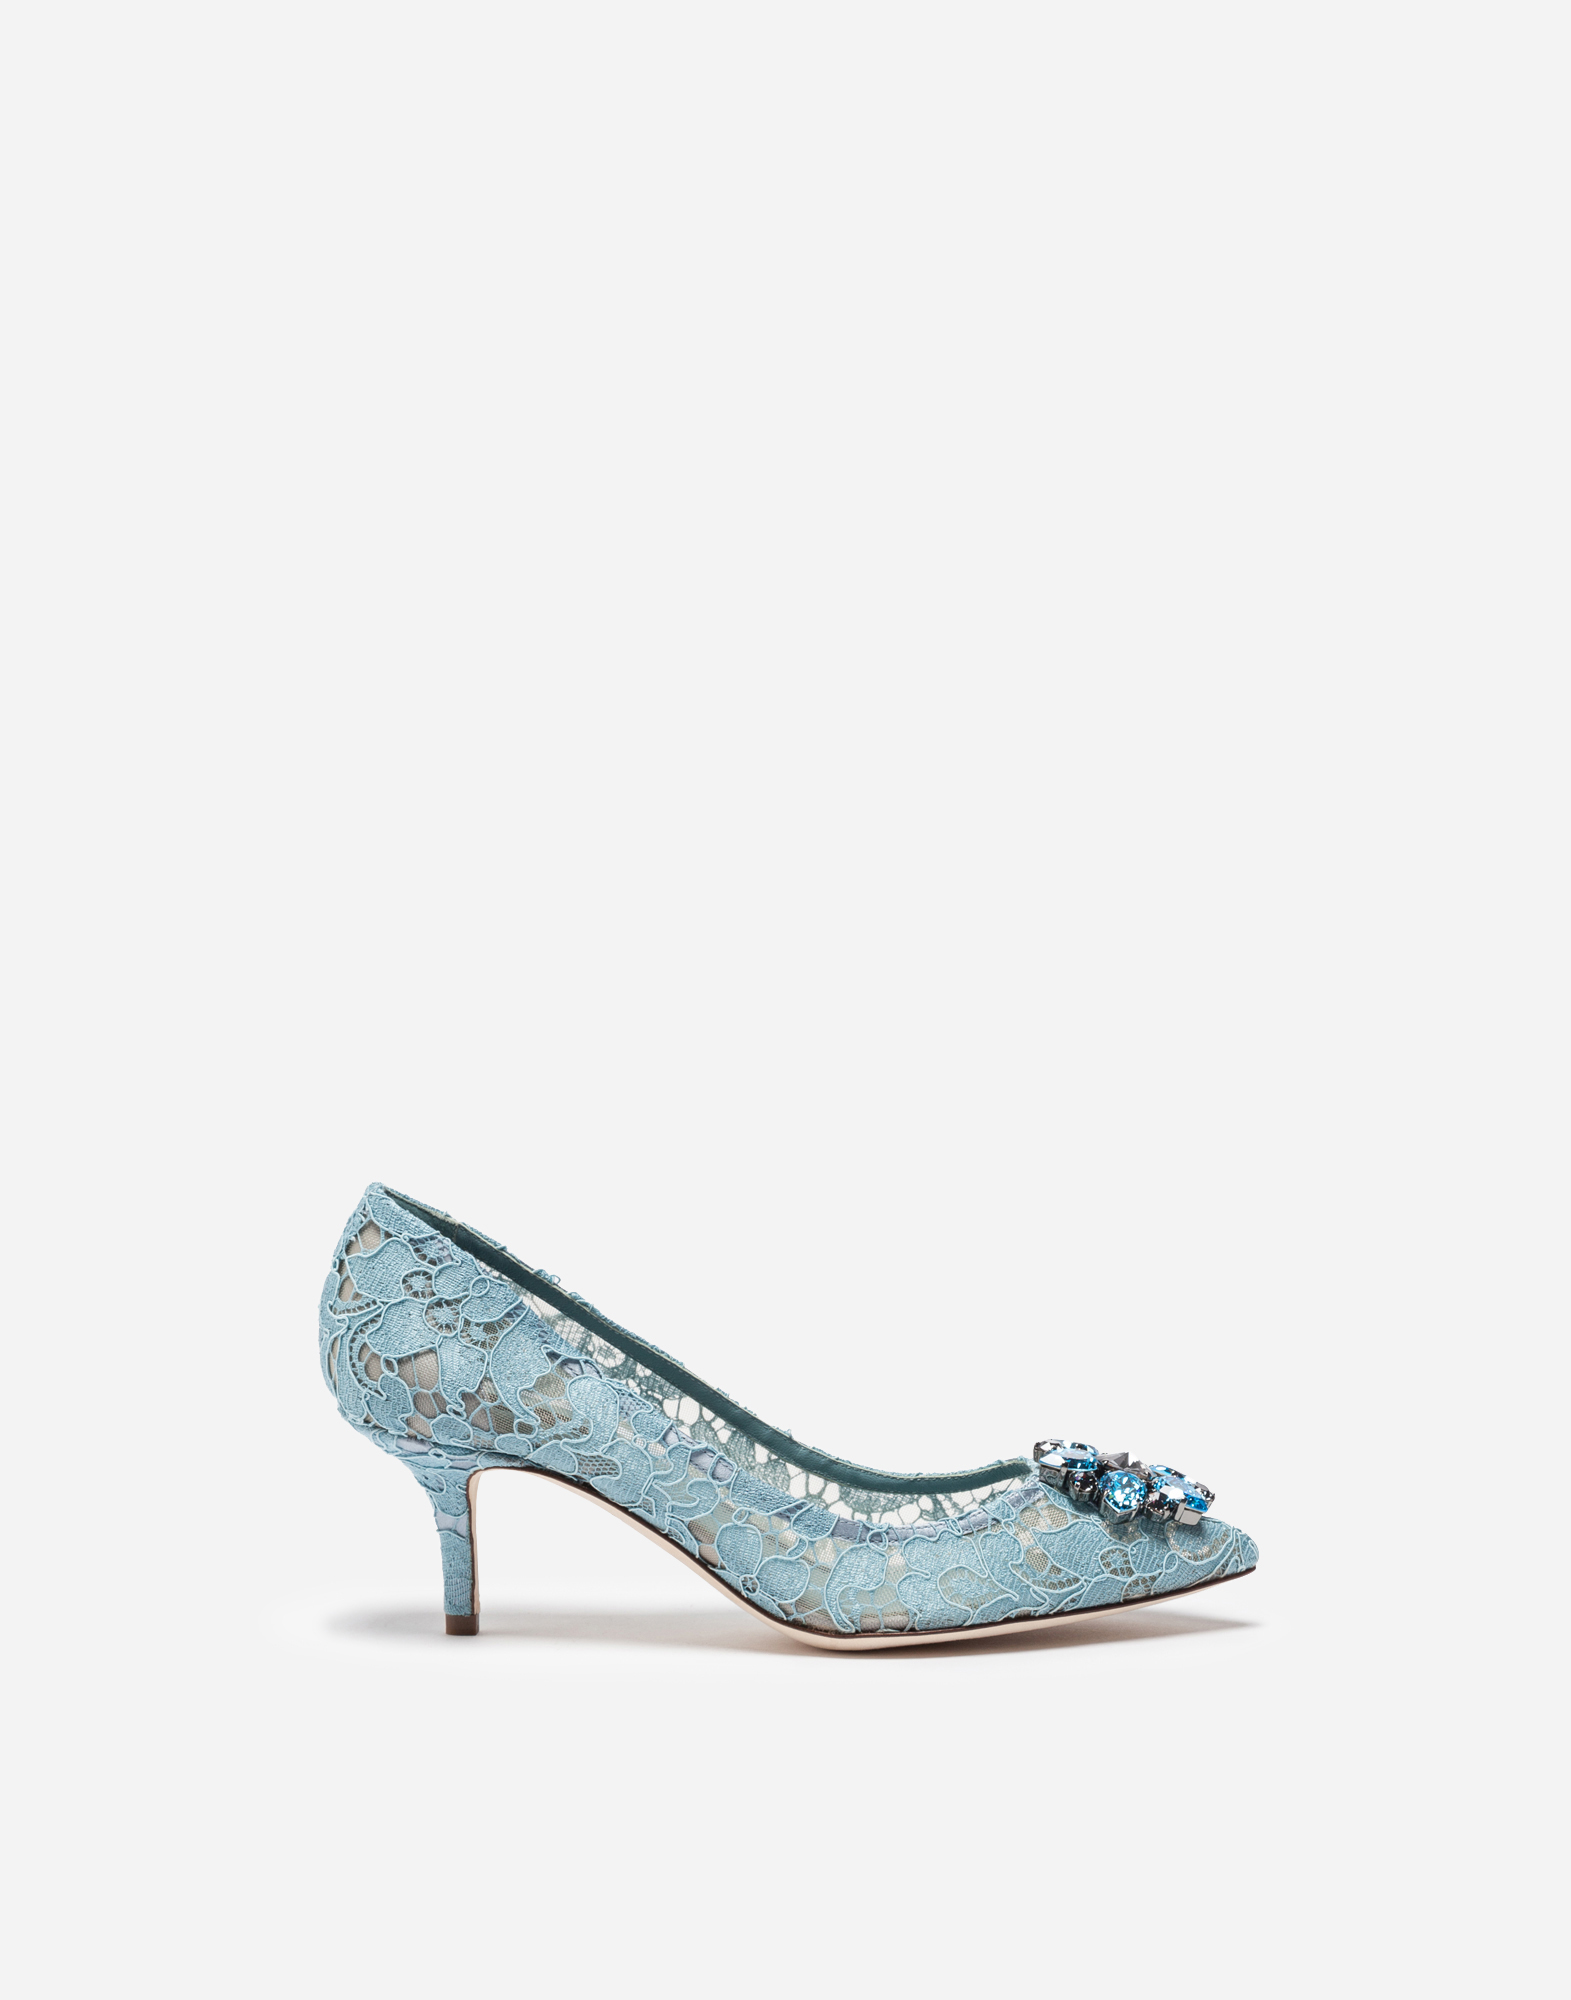 Lace rainbow pumps with brooch detailing in Azure